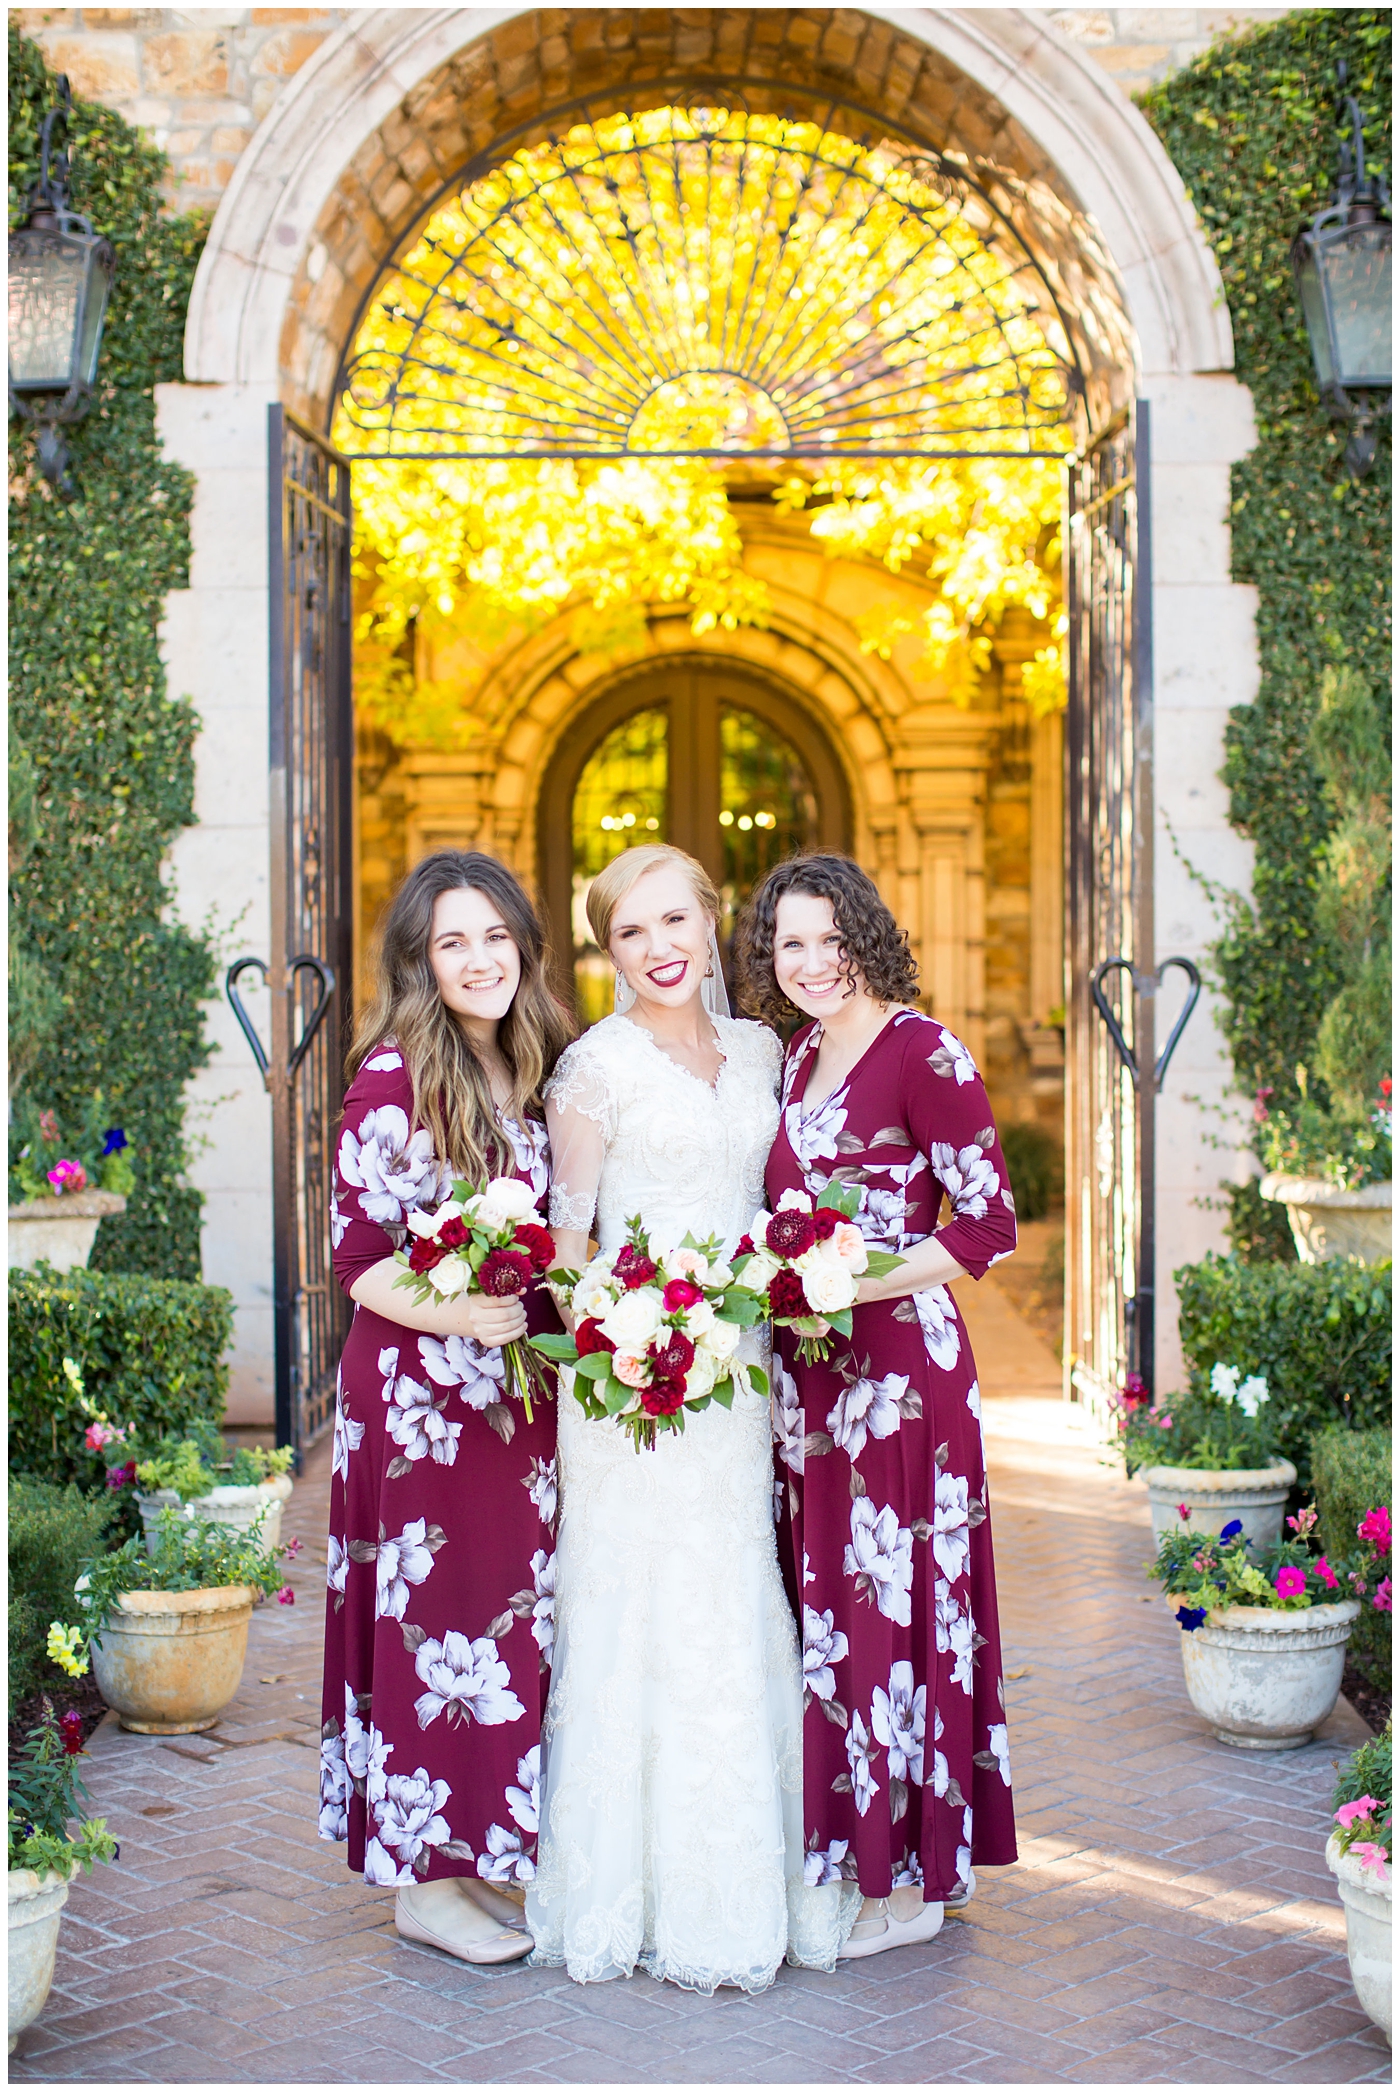 bride in sleeved lace dress with burgundy, white, and green wedding bouquet with bridesmaids in long sleeve burgundy and floral dresses wedding day portrait at Villa Siena